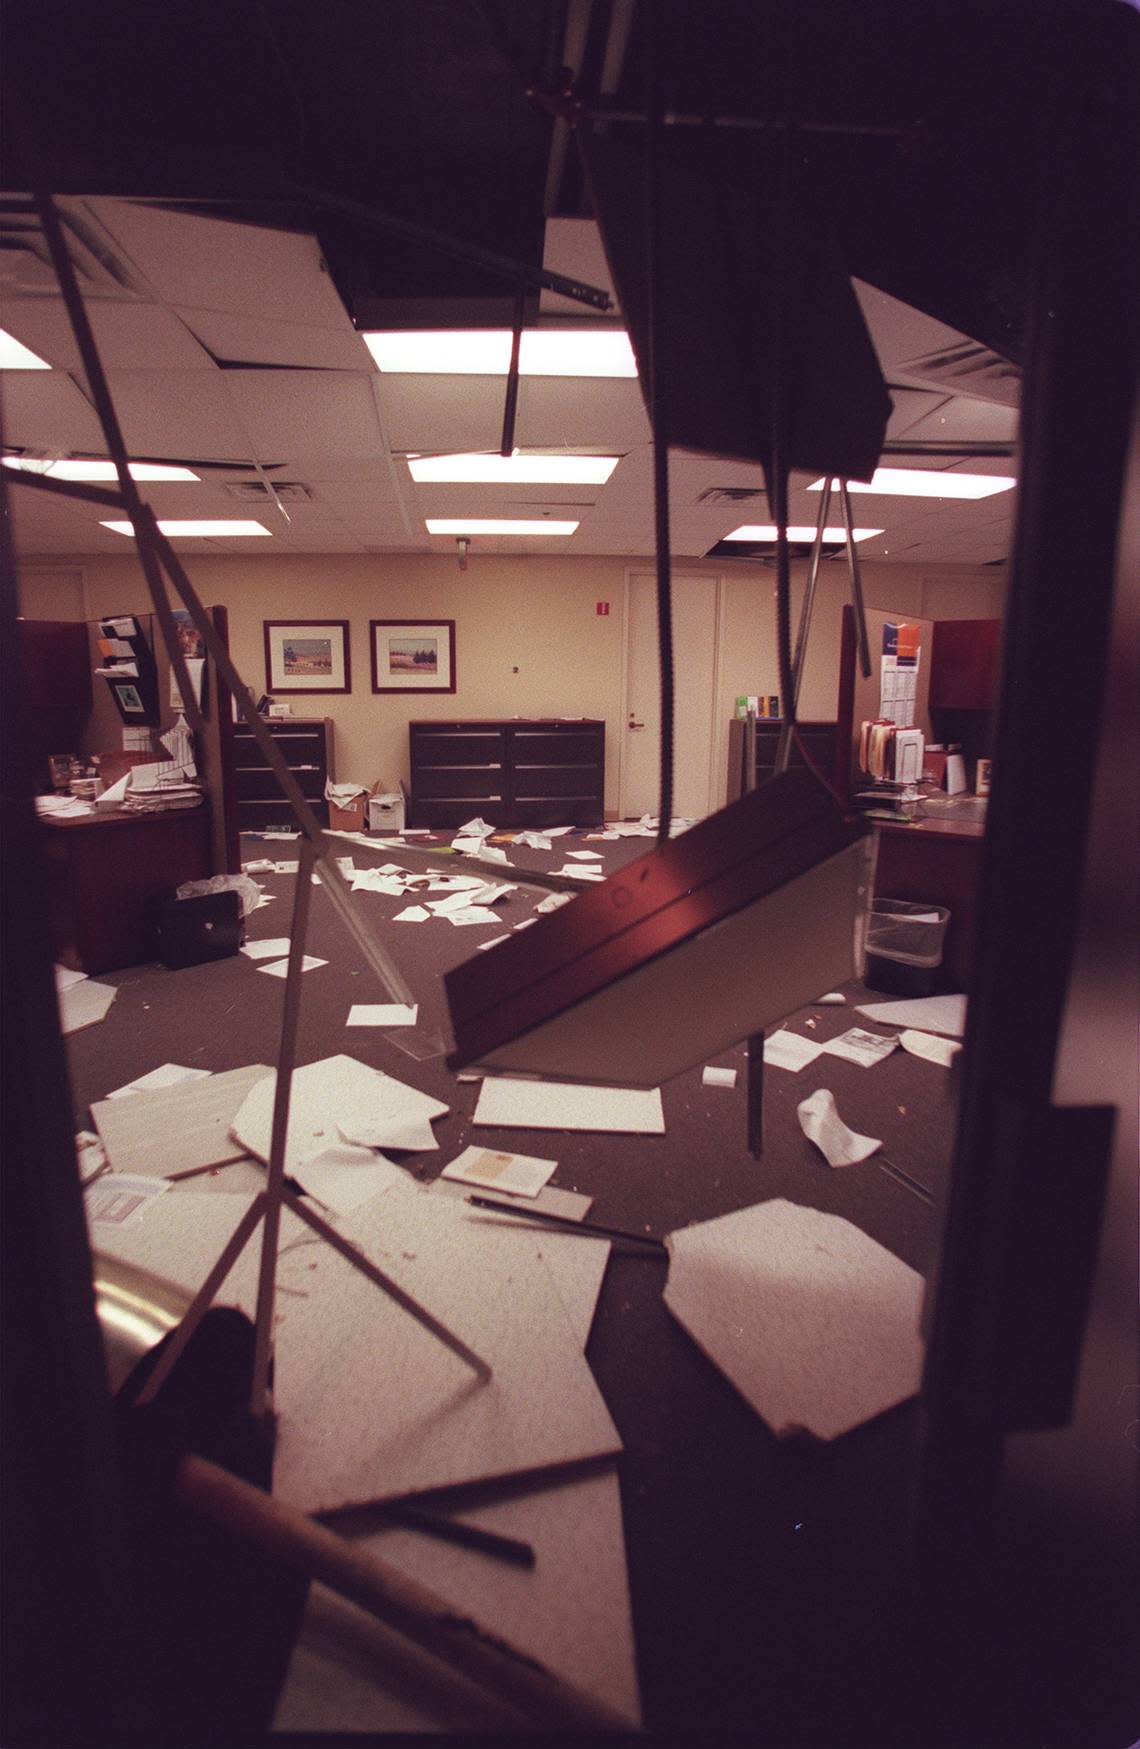 A 7th floor office inside the Bank One building the night the tornado hit on March 28, 2000 in downtown Fort Worth